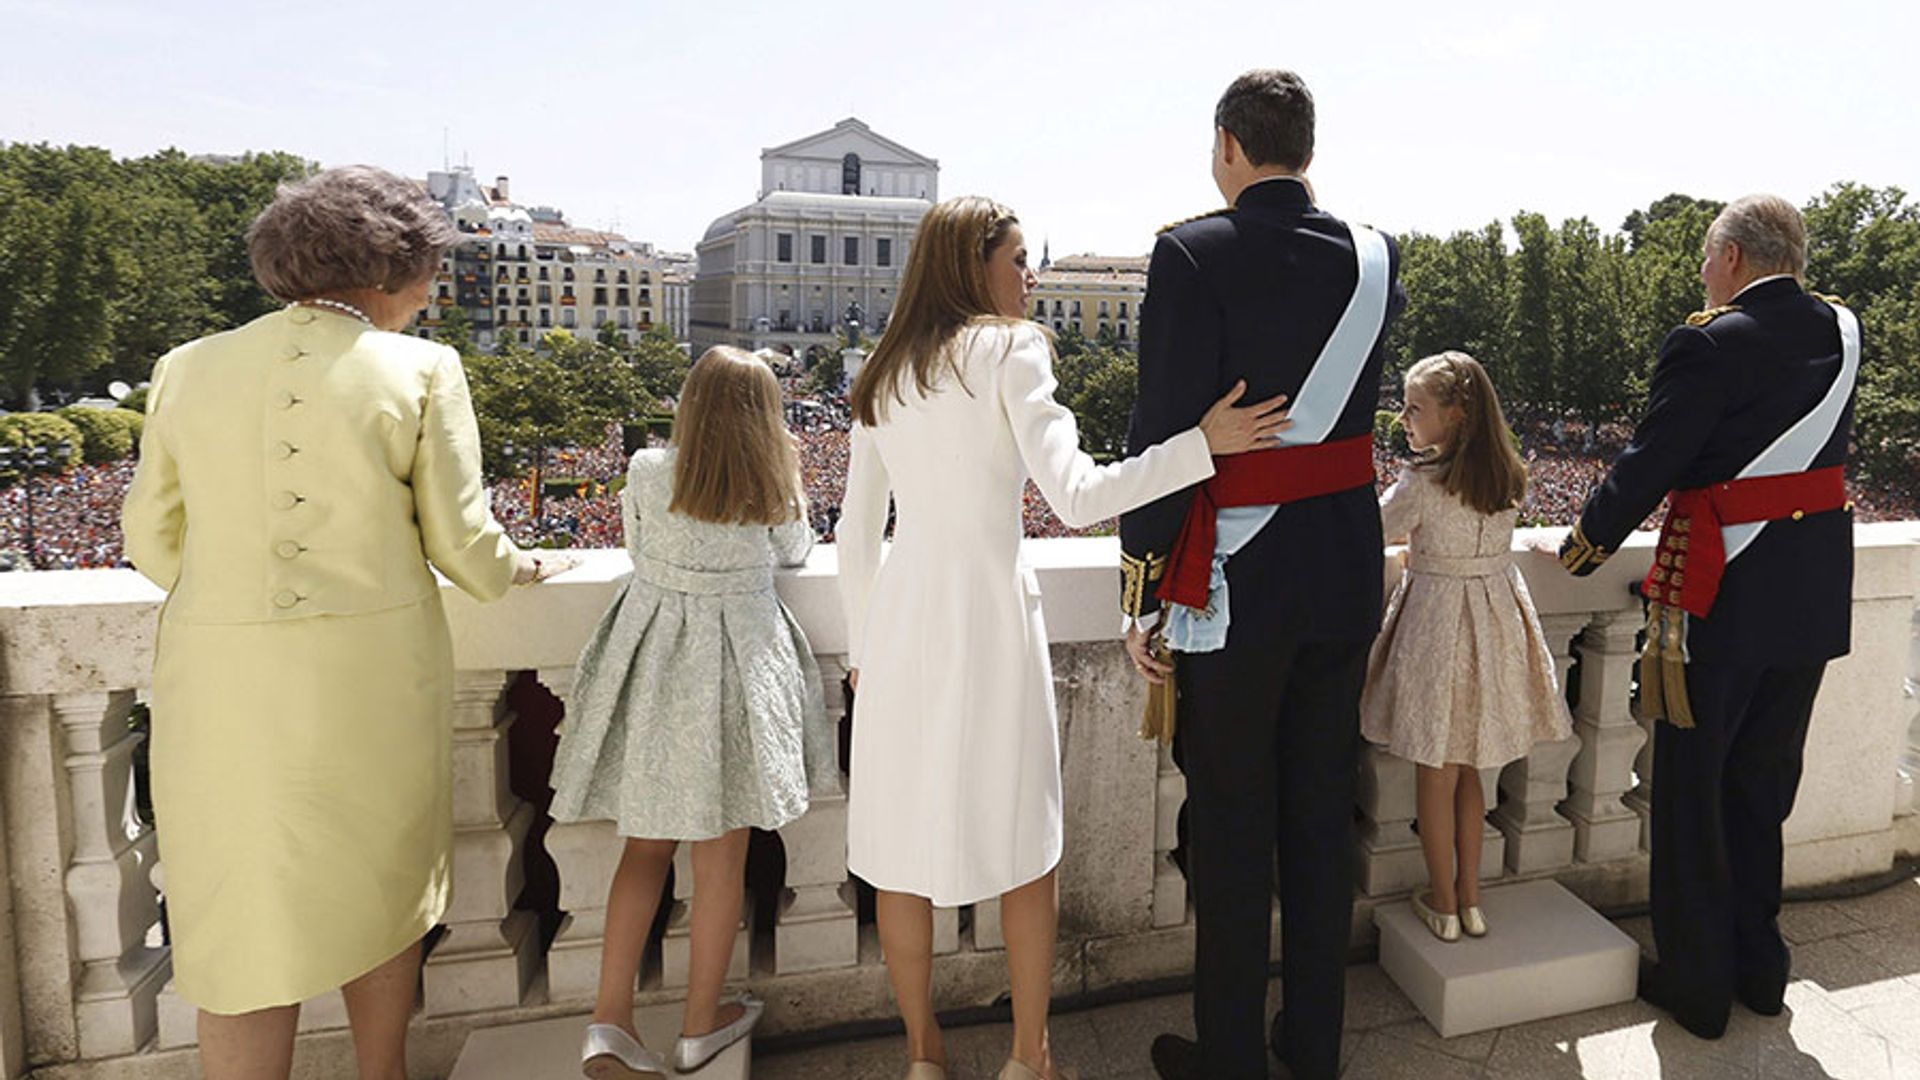 Newly crowned King Felipe VI and Queen Letizia of Spain kiss on royal balcony